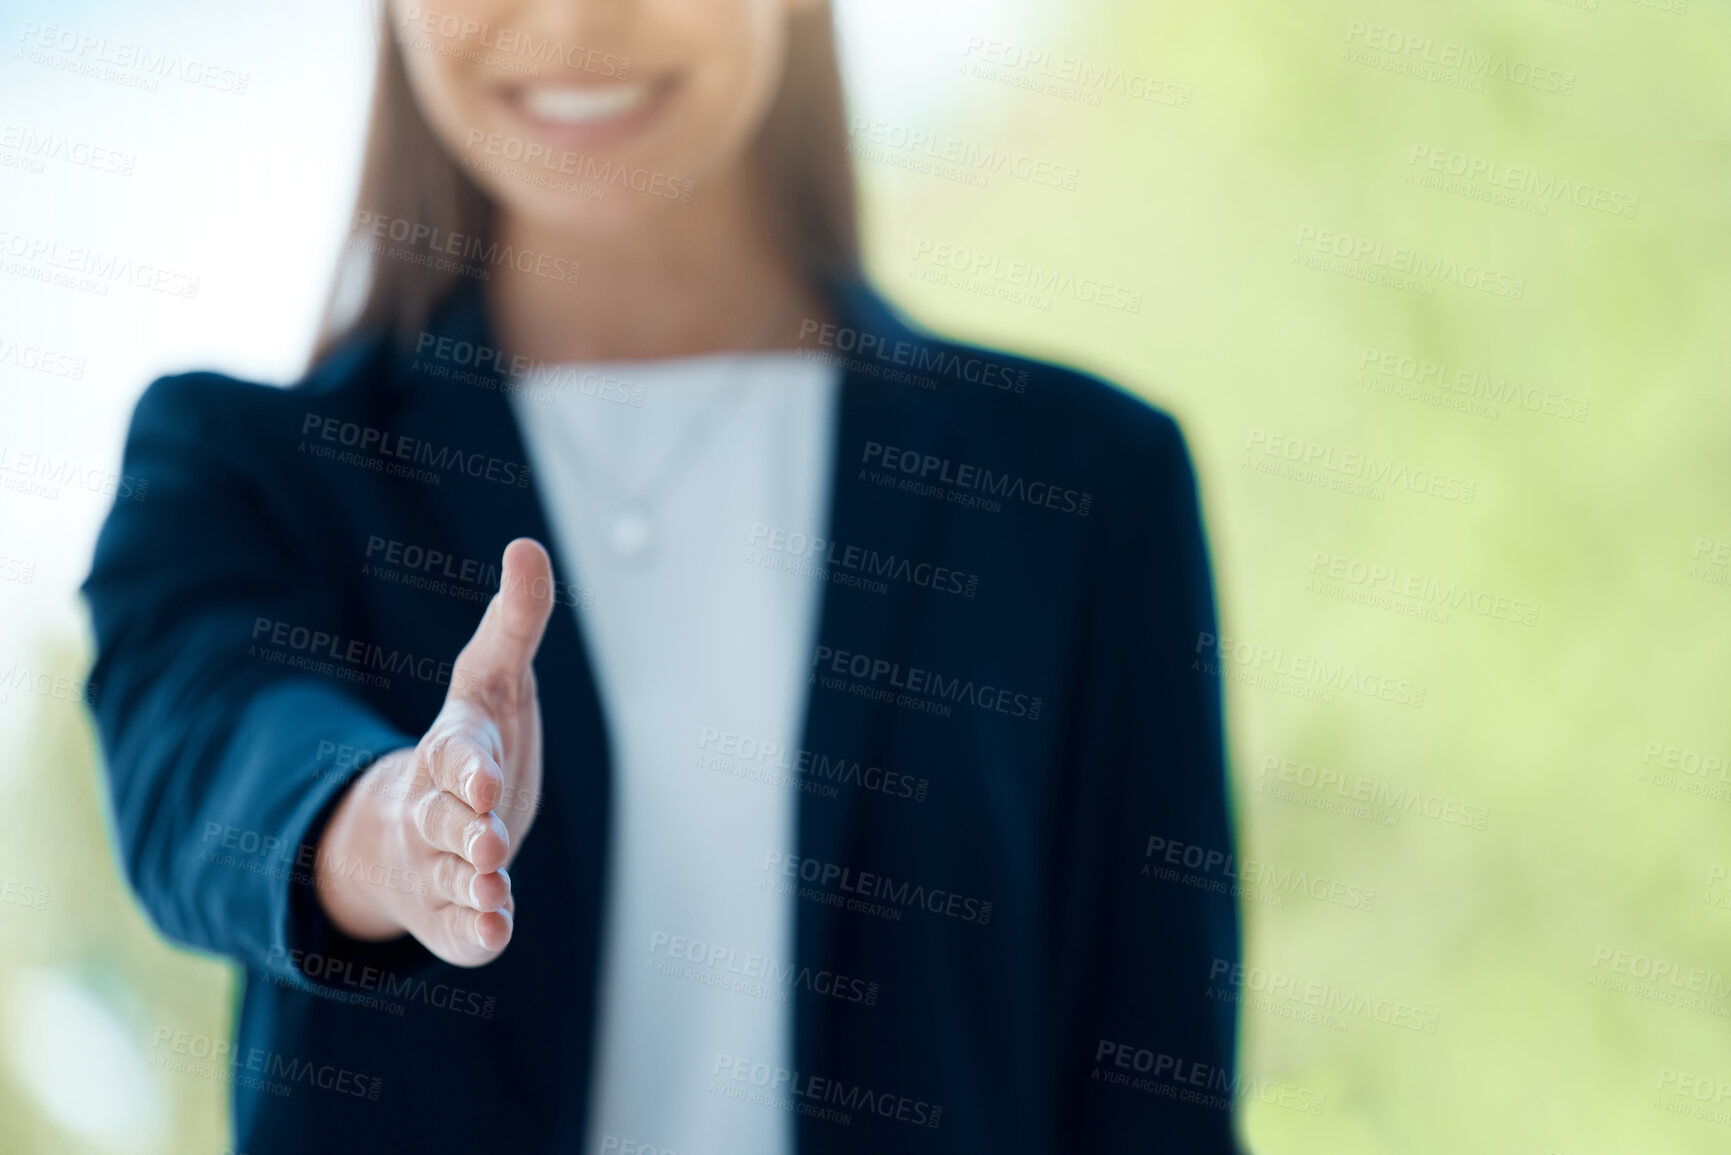 Buy stock photo Closeup shot of an unrecognisable businesswoman extending a handshake in an office